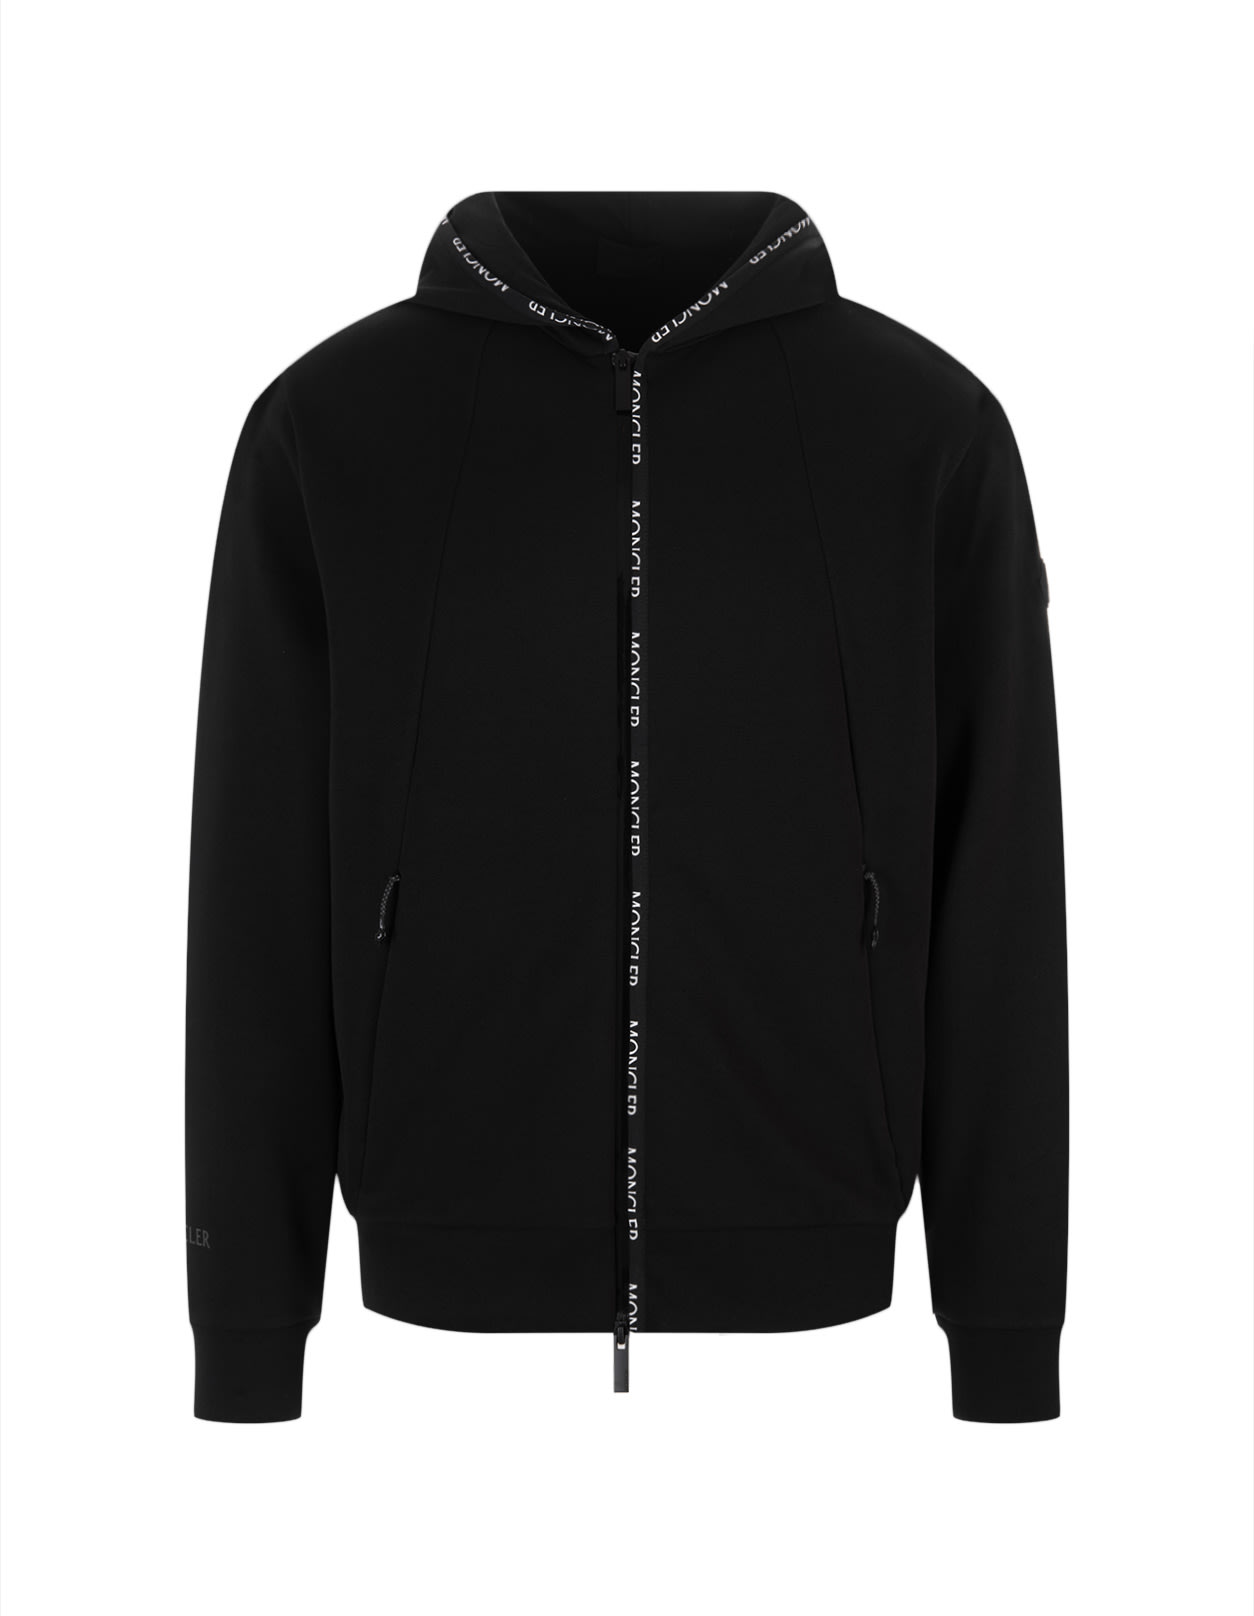 MONCLER BLACK ZIPPED HOODIE WITH LOGOED INSERT